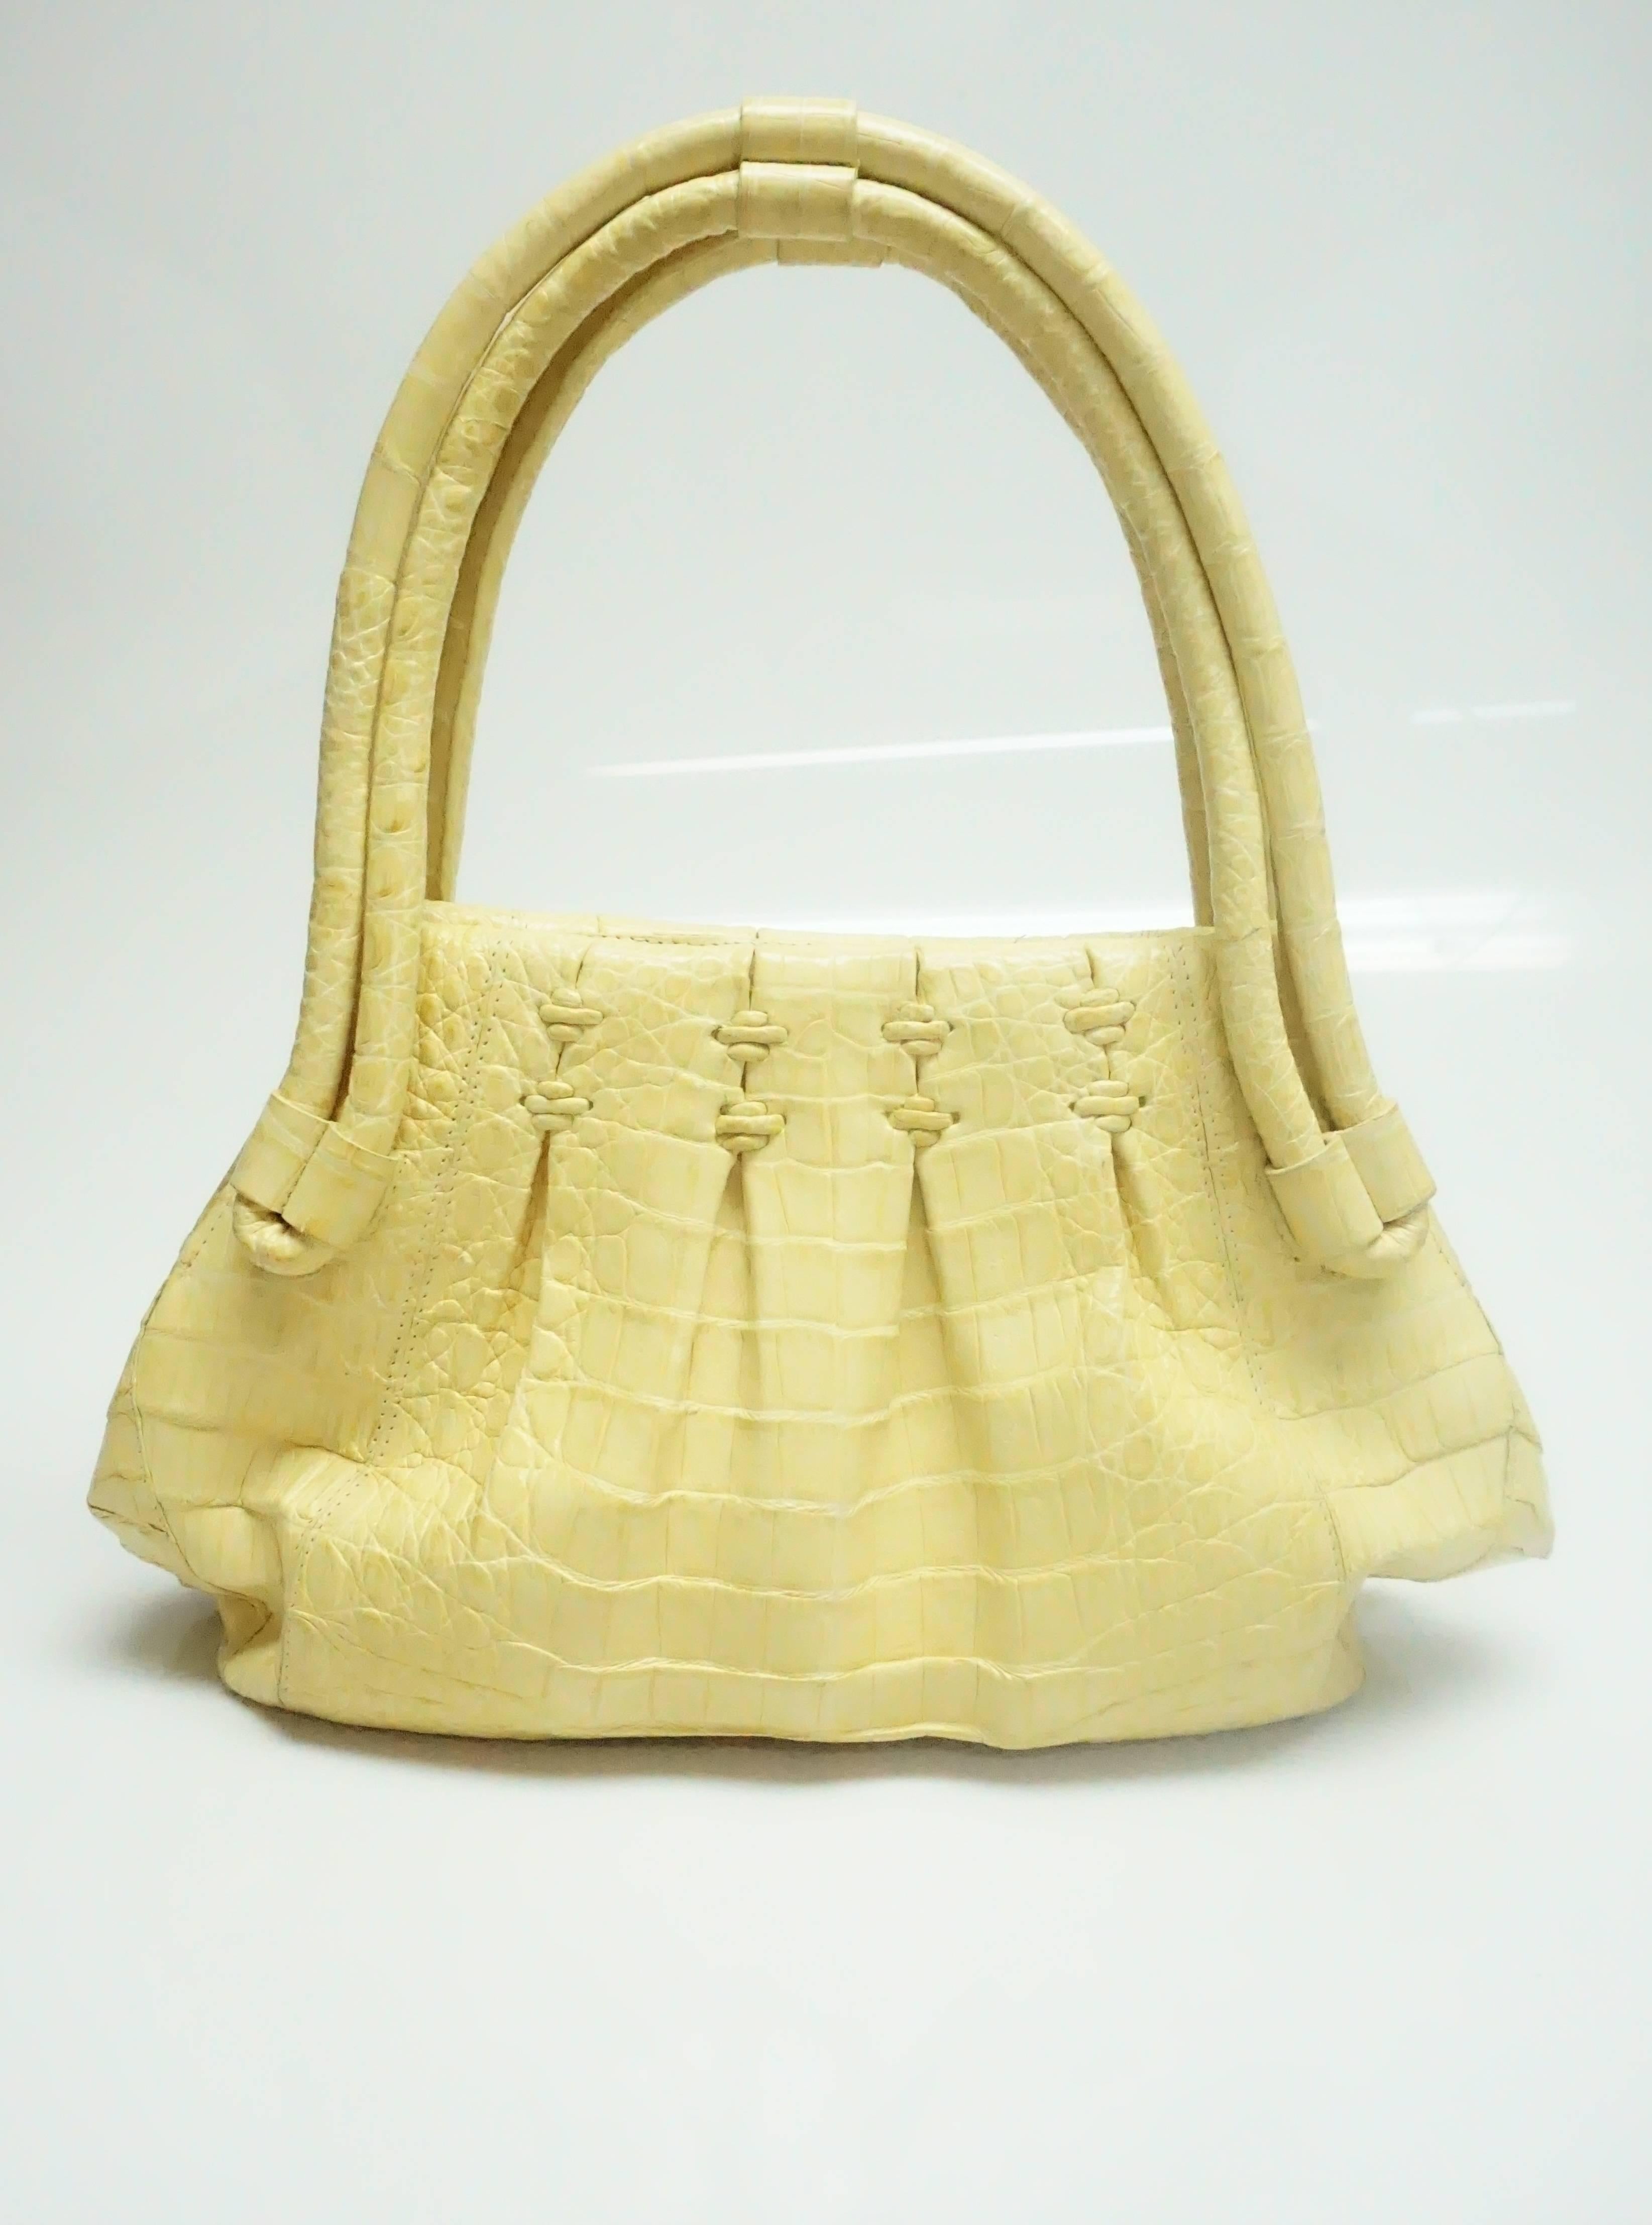 Nancy Gonzalez Yellow Crocodile Shoulder Handbag  This beautiful unusual style of bag is box pleated with two double straps. It has a magnetic closure and it has been barely used. This bag is in excellent condition.
Measurements
Height: 8.5